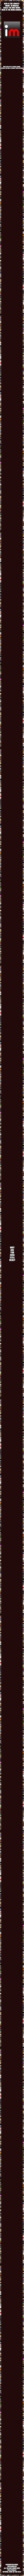 The longest "meme" in imgflip. (AKA the most boring meme ever) | HERE IS THE LONGEST "MEME" IN IMGFLIP, REALLY THE ONLY MEME HERE IS THE MEME BORDER. DONT EVEN TRY TO SCROLL DOWN, BECAUSE YOU WILL LITERALLY FIND NOTHING. WHY ARE YOU EVEN STILL HERE? CONGRATULATIONS, YOU SCROLLED ALL THE WAY DOWN HERE FOR LITERALLY NOTHING. HOW DO YOU FEEL? | image tagged in long meme,meme border | made w/ Imgflip meme maker